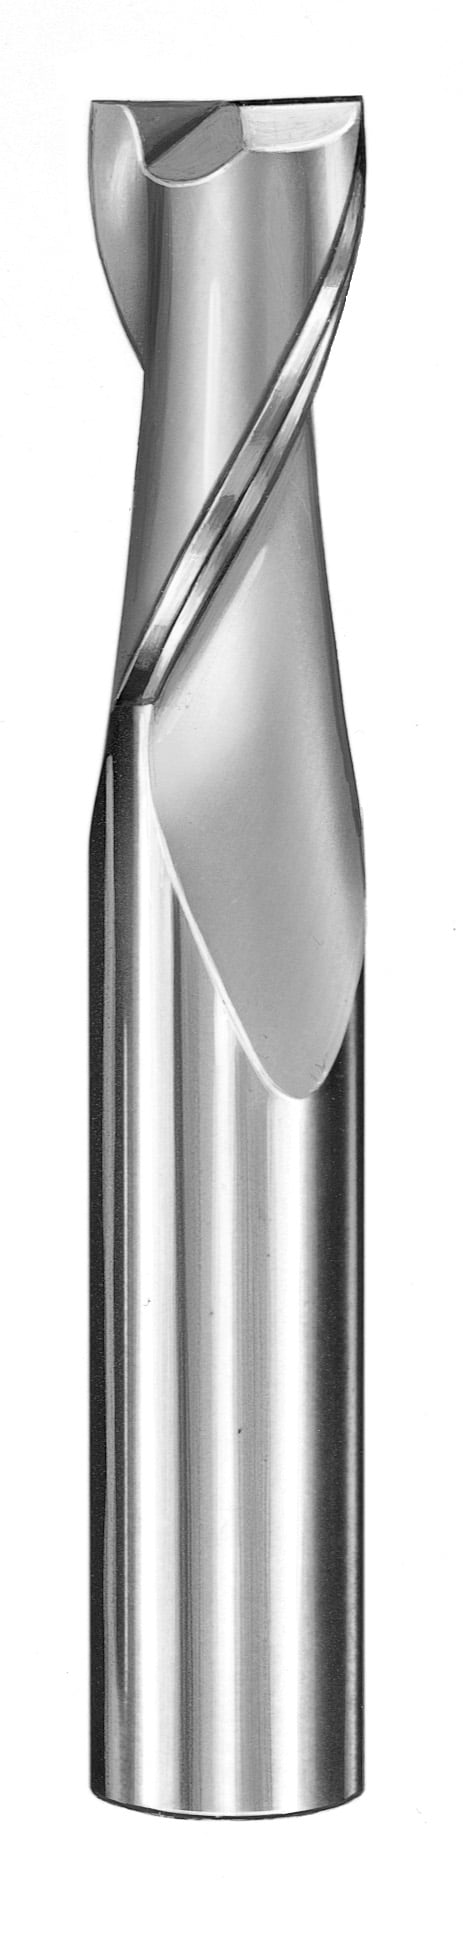 19/64" Dia, 2 Flute, Square End End Mill - 30337